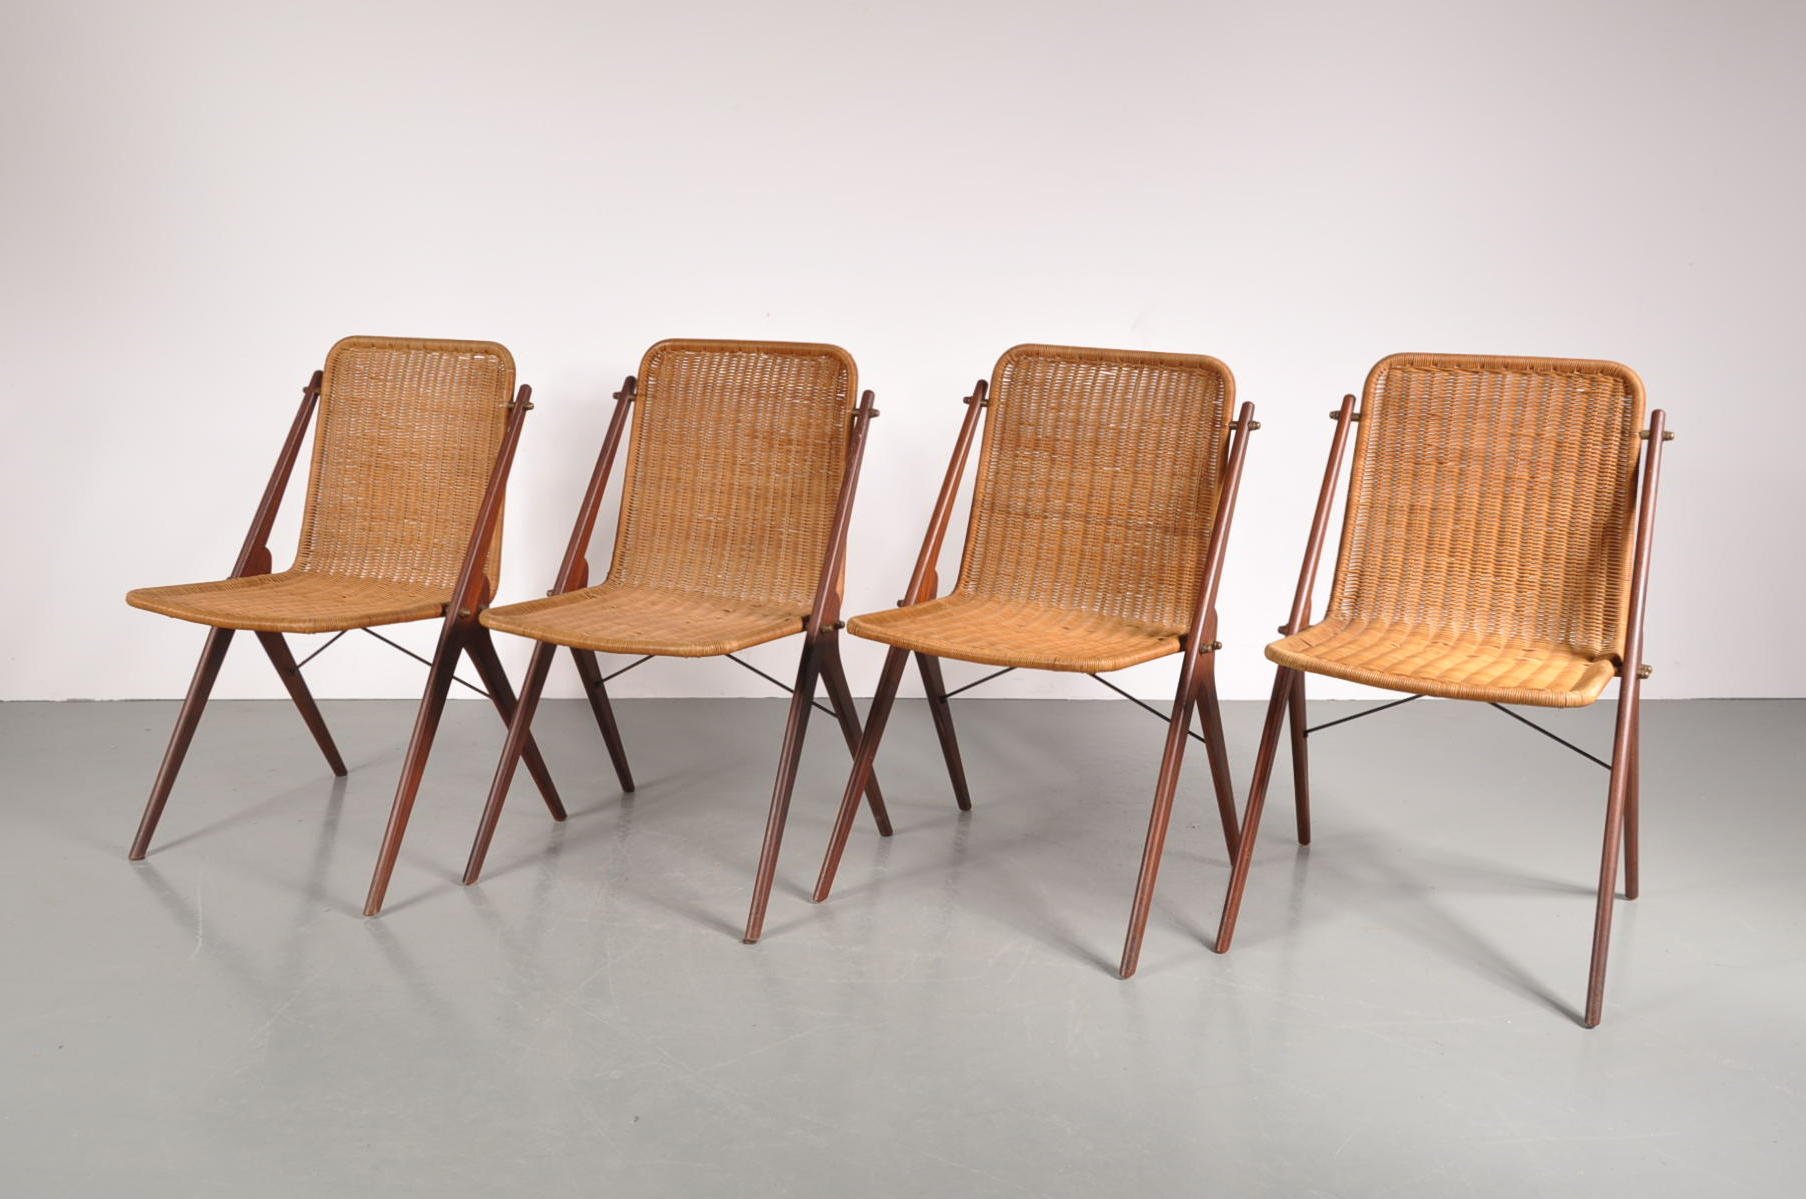 Vintage Teak and Wicker Dining Chairs, Set of 4 for sale at Pamono